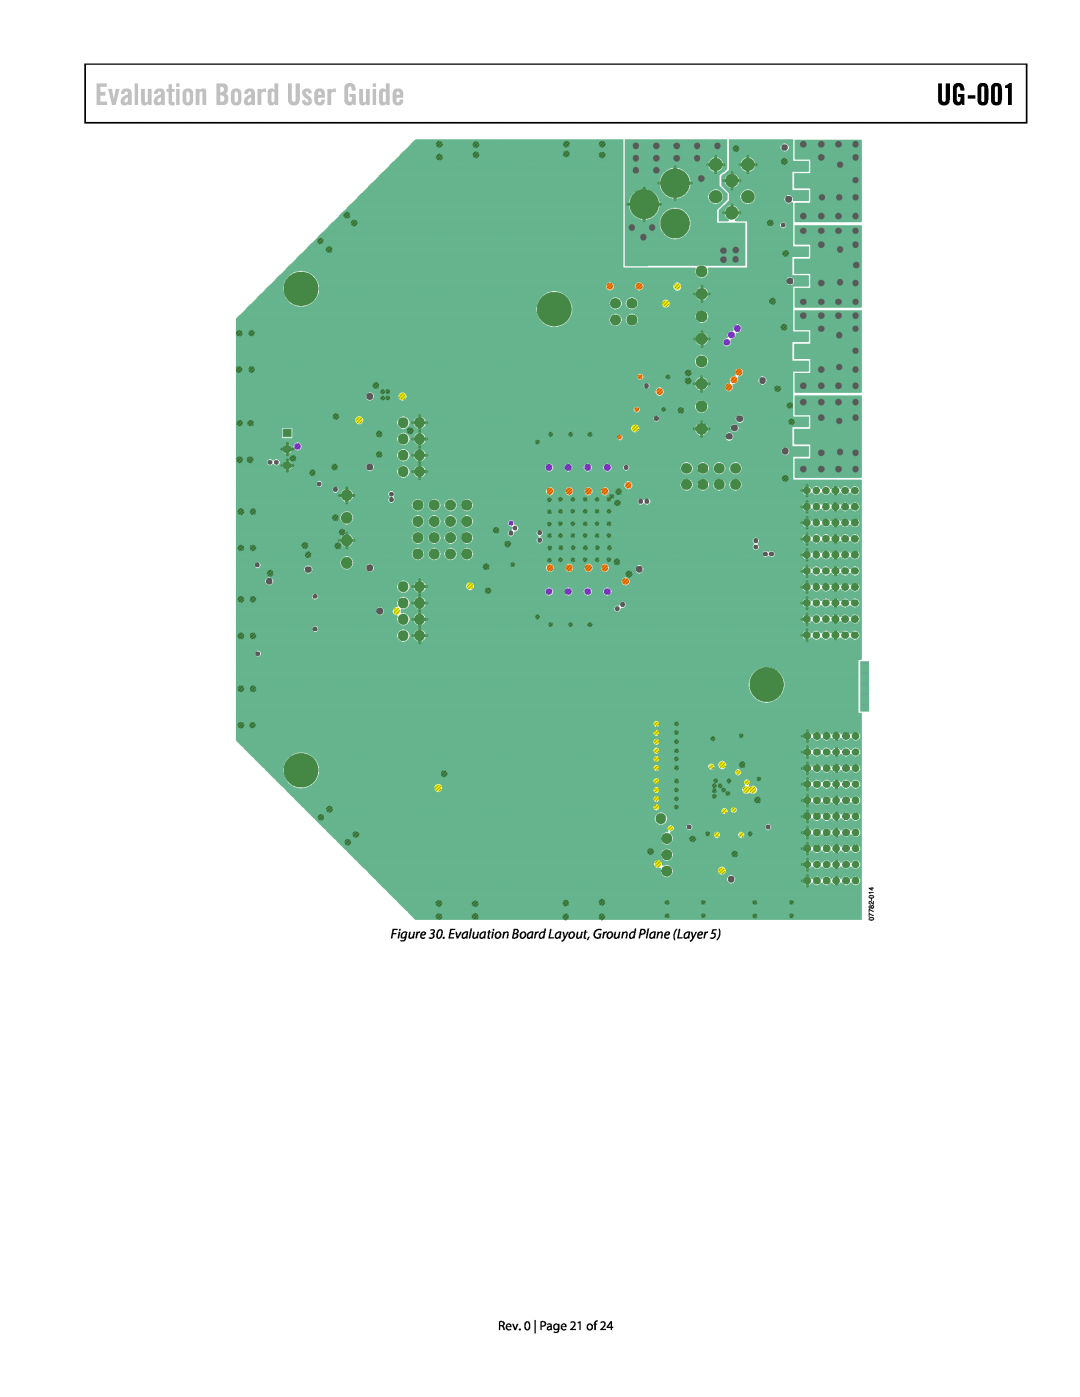 Analog Devices UG-001, AD9273 Evaluation Board User Guide, Evaluation Board Layout, Ground Plane Layer, Rev, 07782-014 